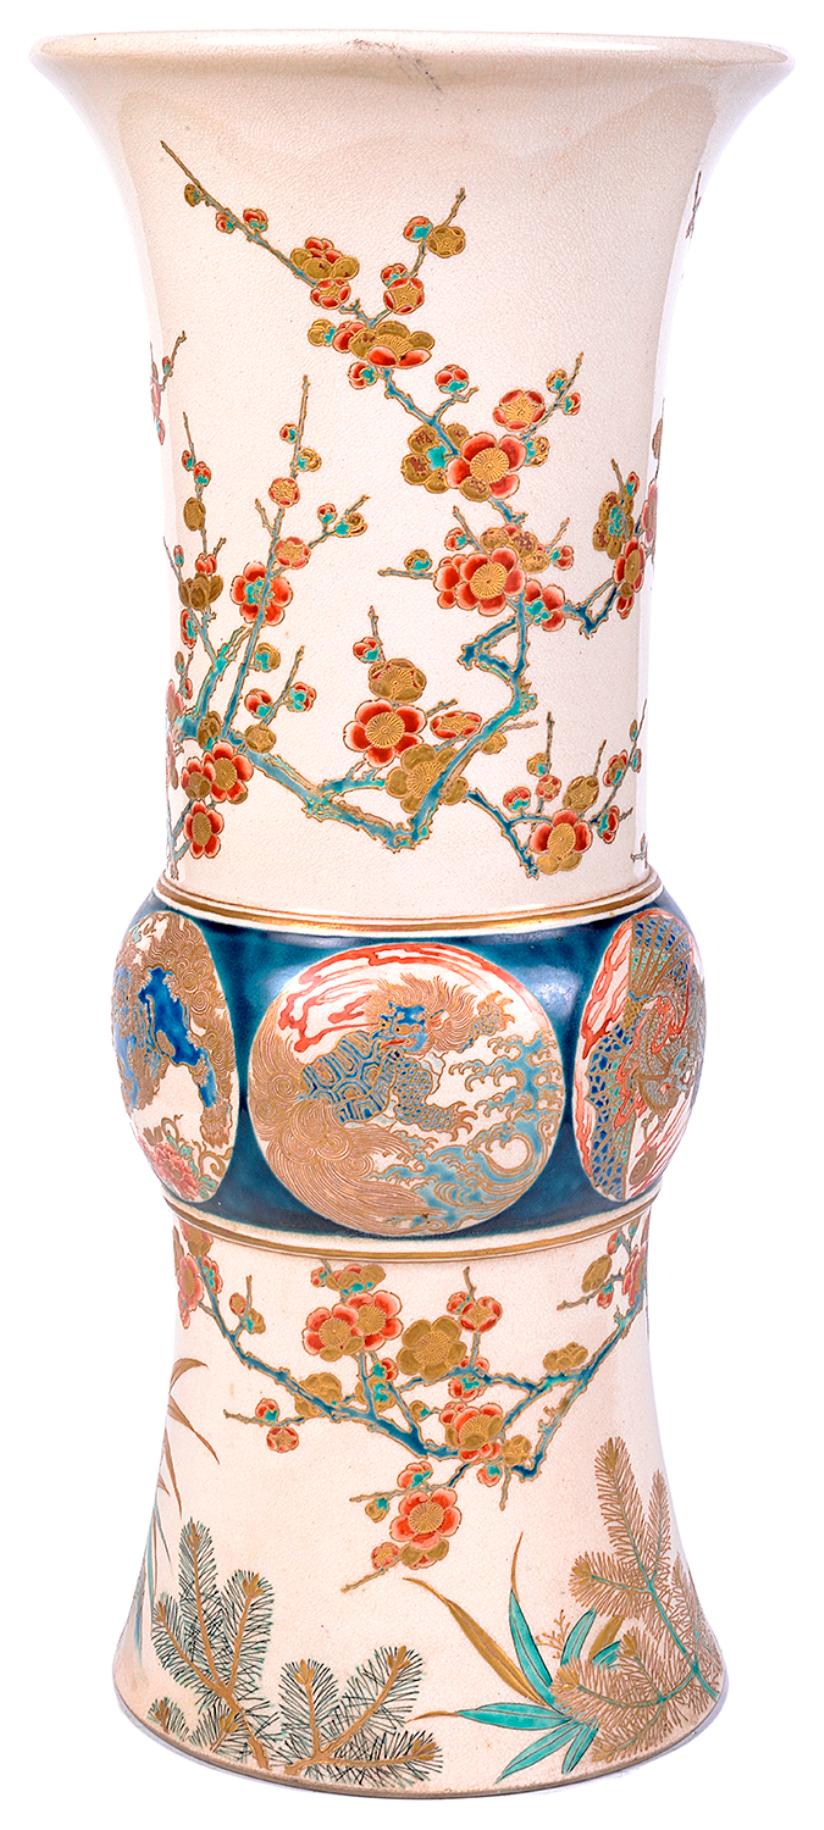 A good quality 19th Century Japanese Satsuma vase, having imperial influences with a dark blue ground, blossom tree decoration to the flared neck, circular inset painted panels to the centre depicting mythical dragons. Signed to the base.